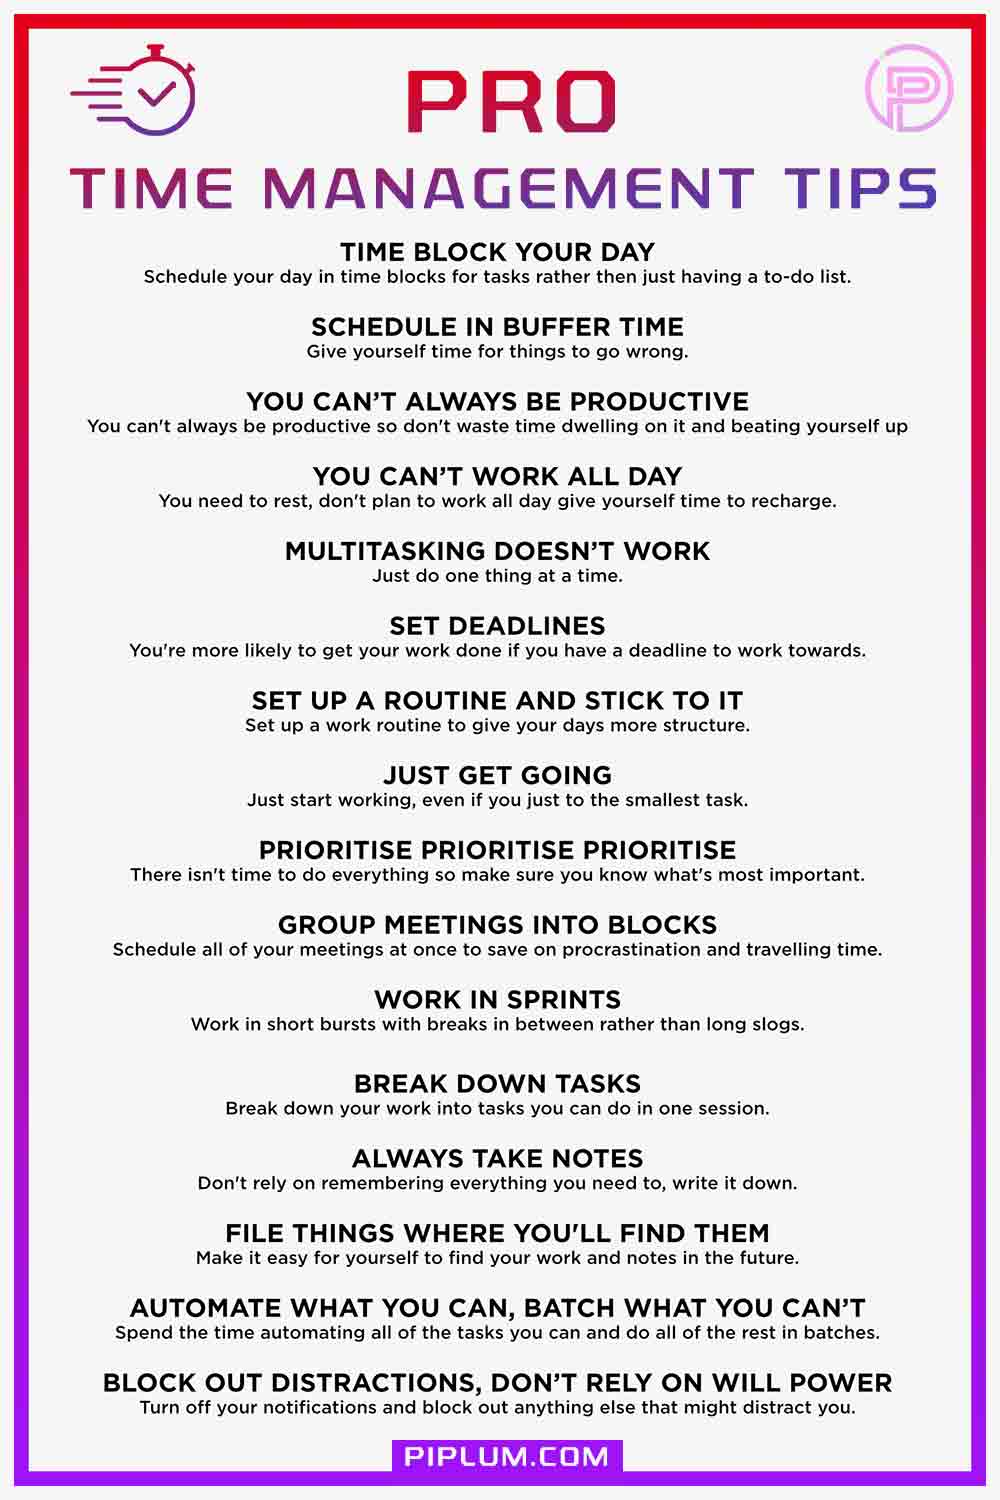 Pro-time-management-and-planning-tips-Printable-poster-for-office-and-workplace